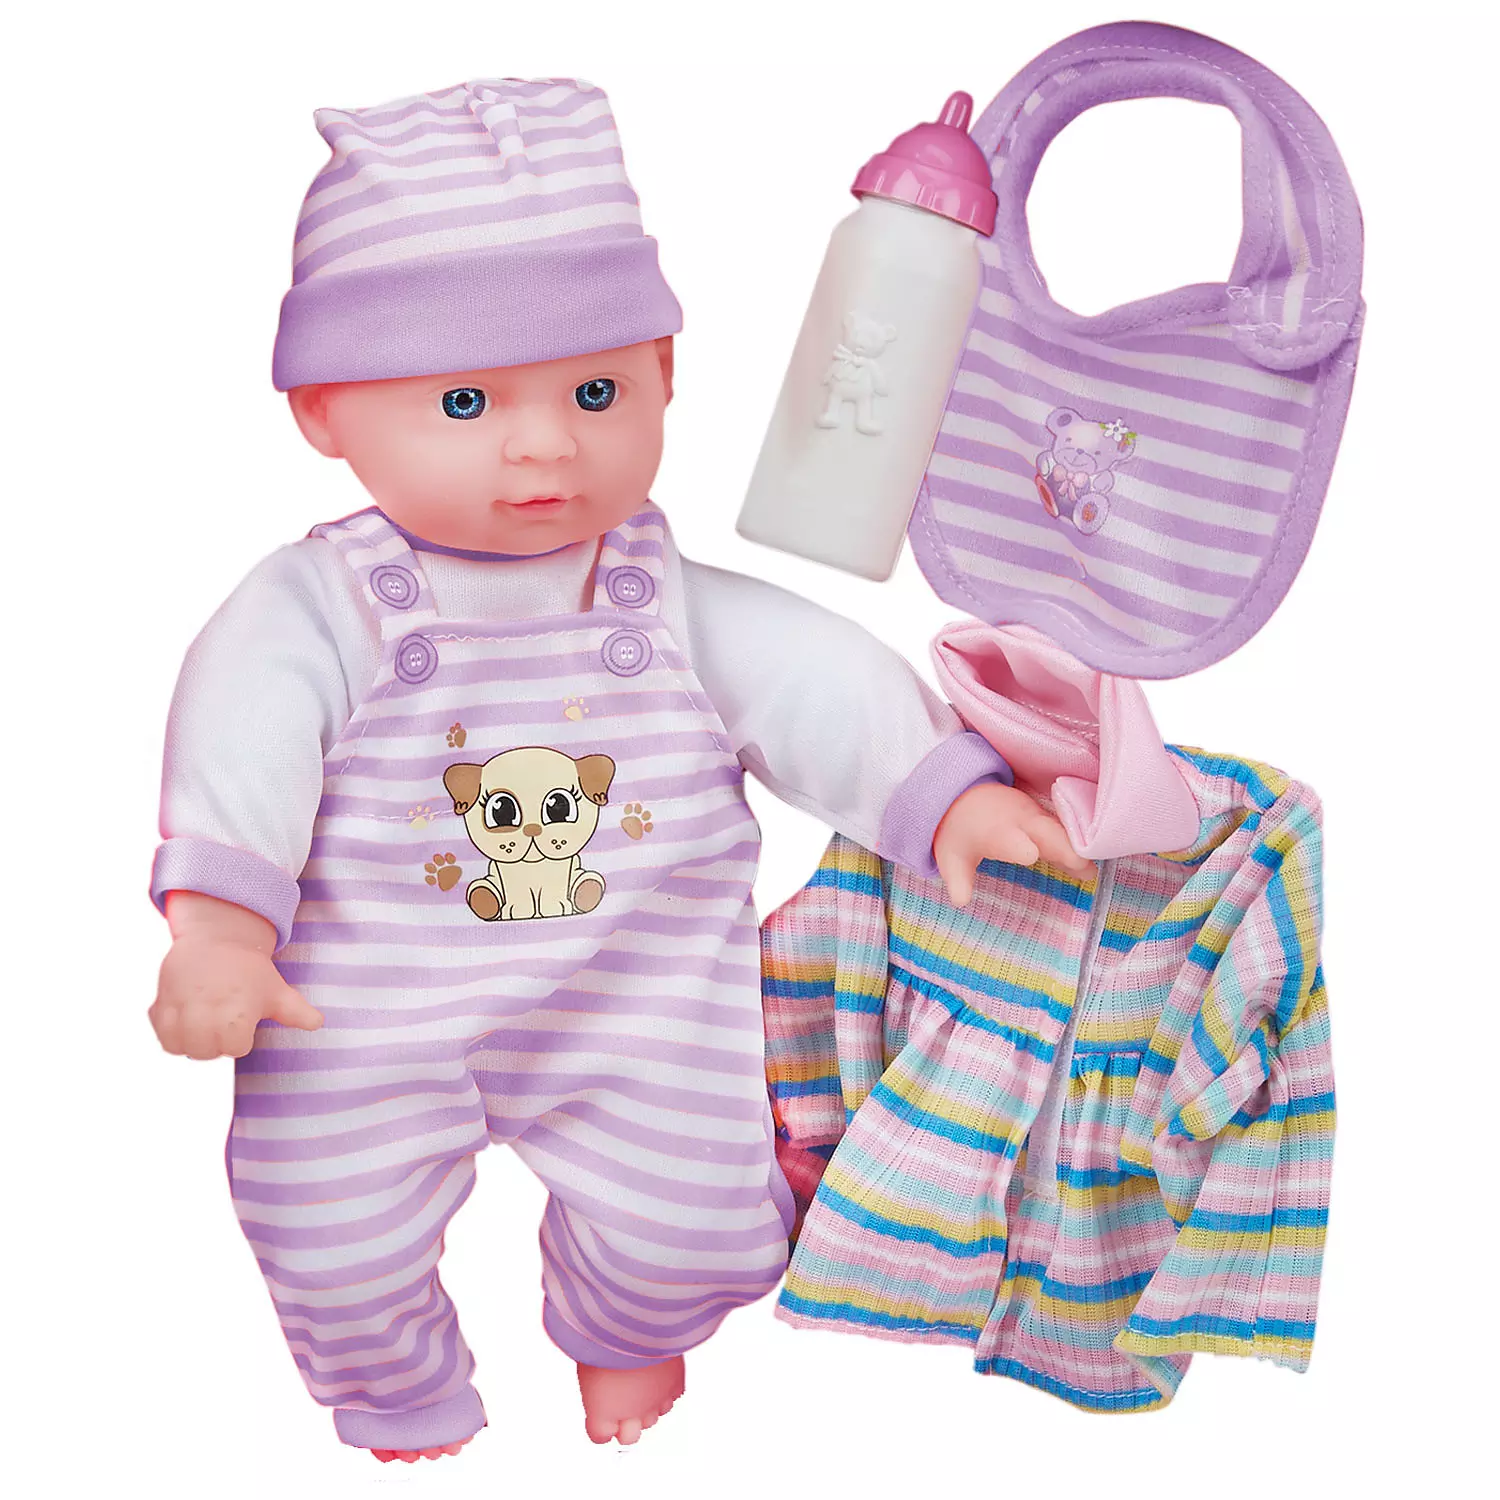 Ens. cadeau Lovely Doll, lilas